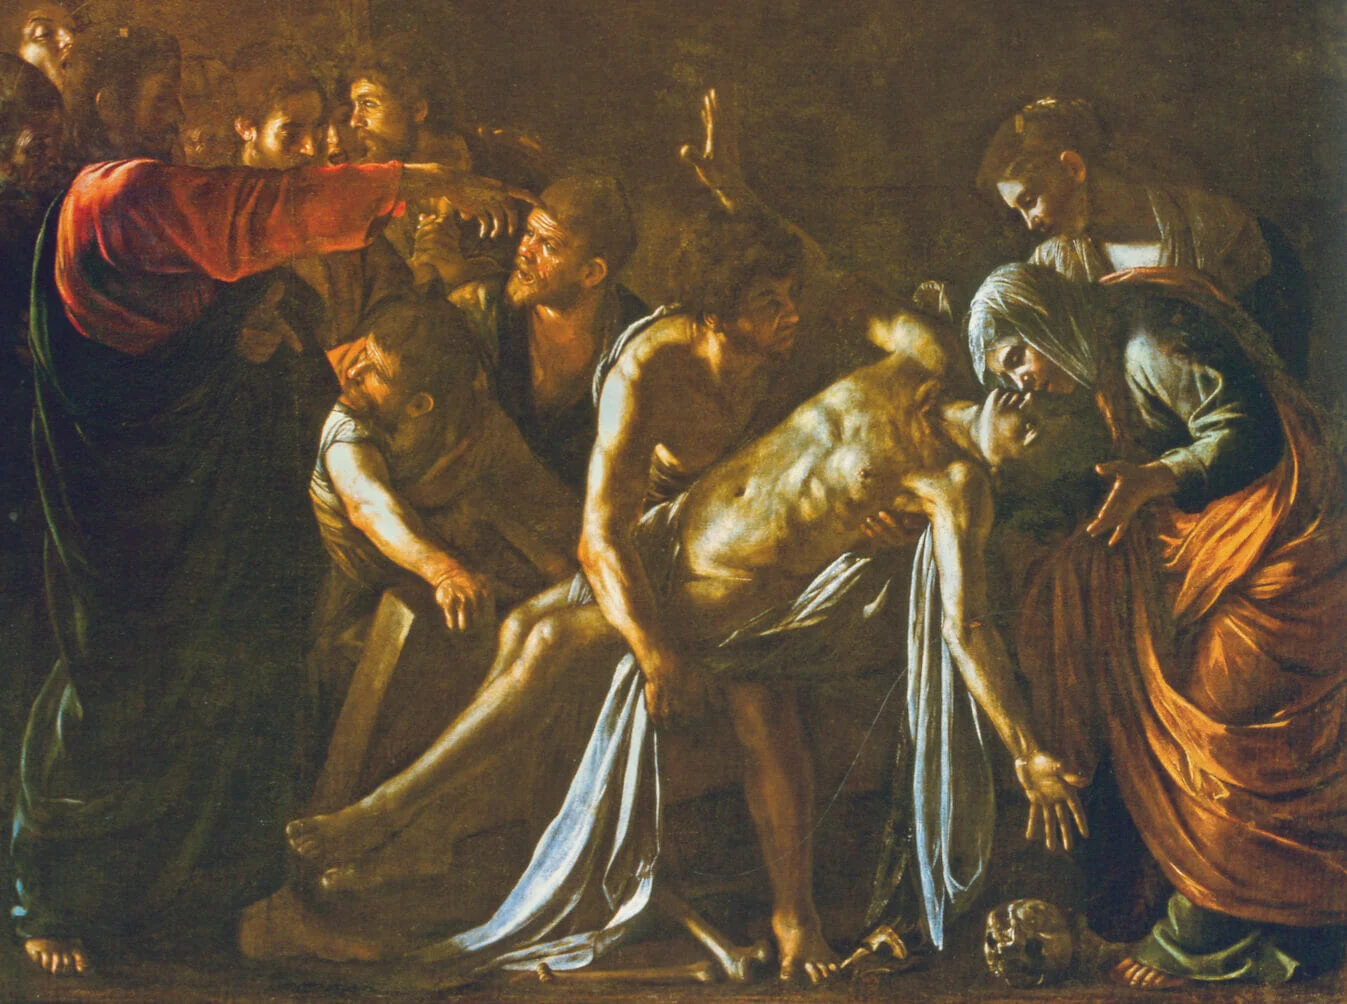 Painting of the raising of Lazarus by Caravaggio